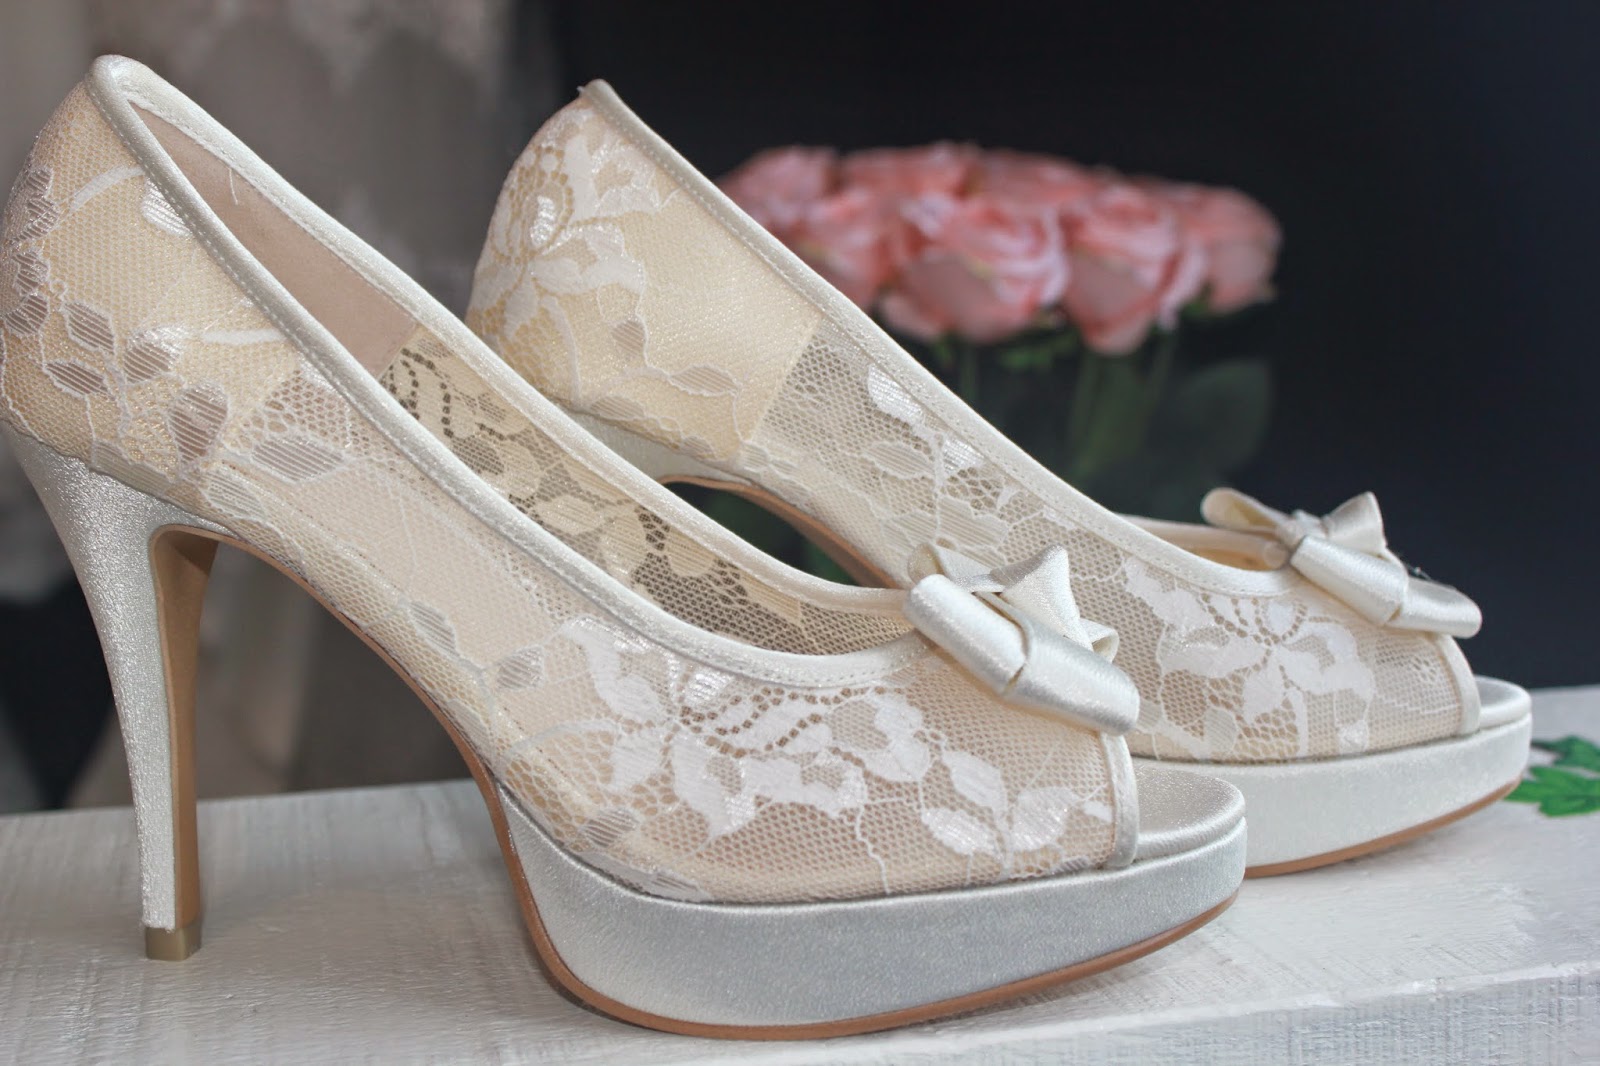 Bridal Shoes: 4 Inches Champagne See Through Lace Bridal Shoes